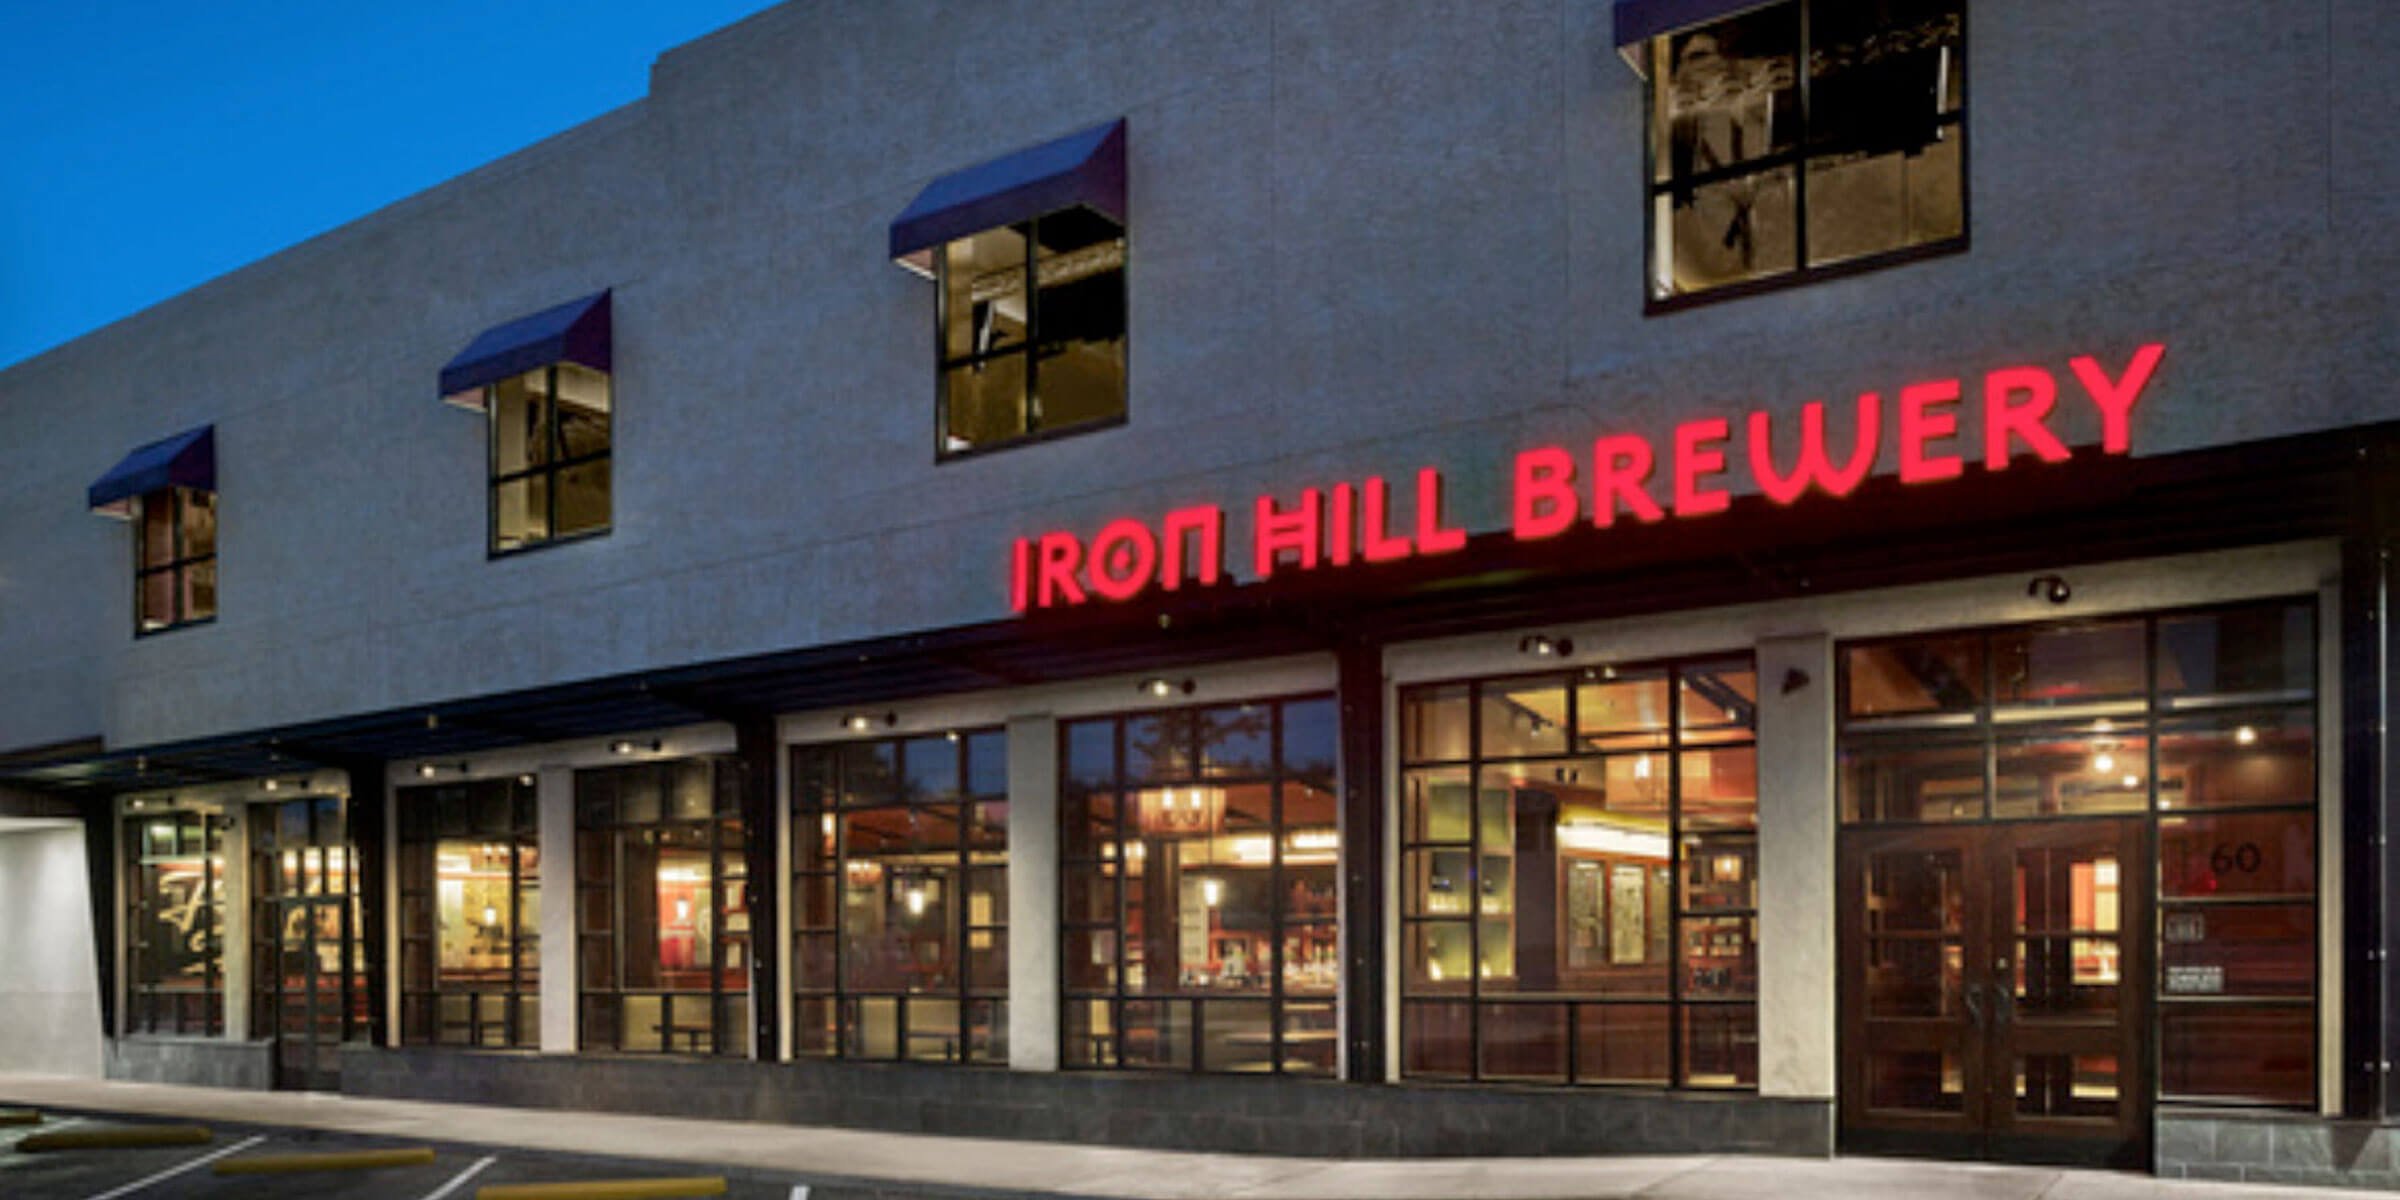 Iron Hill Brewery & Restaurant Absolute Beer